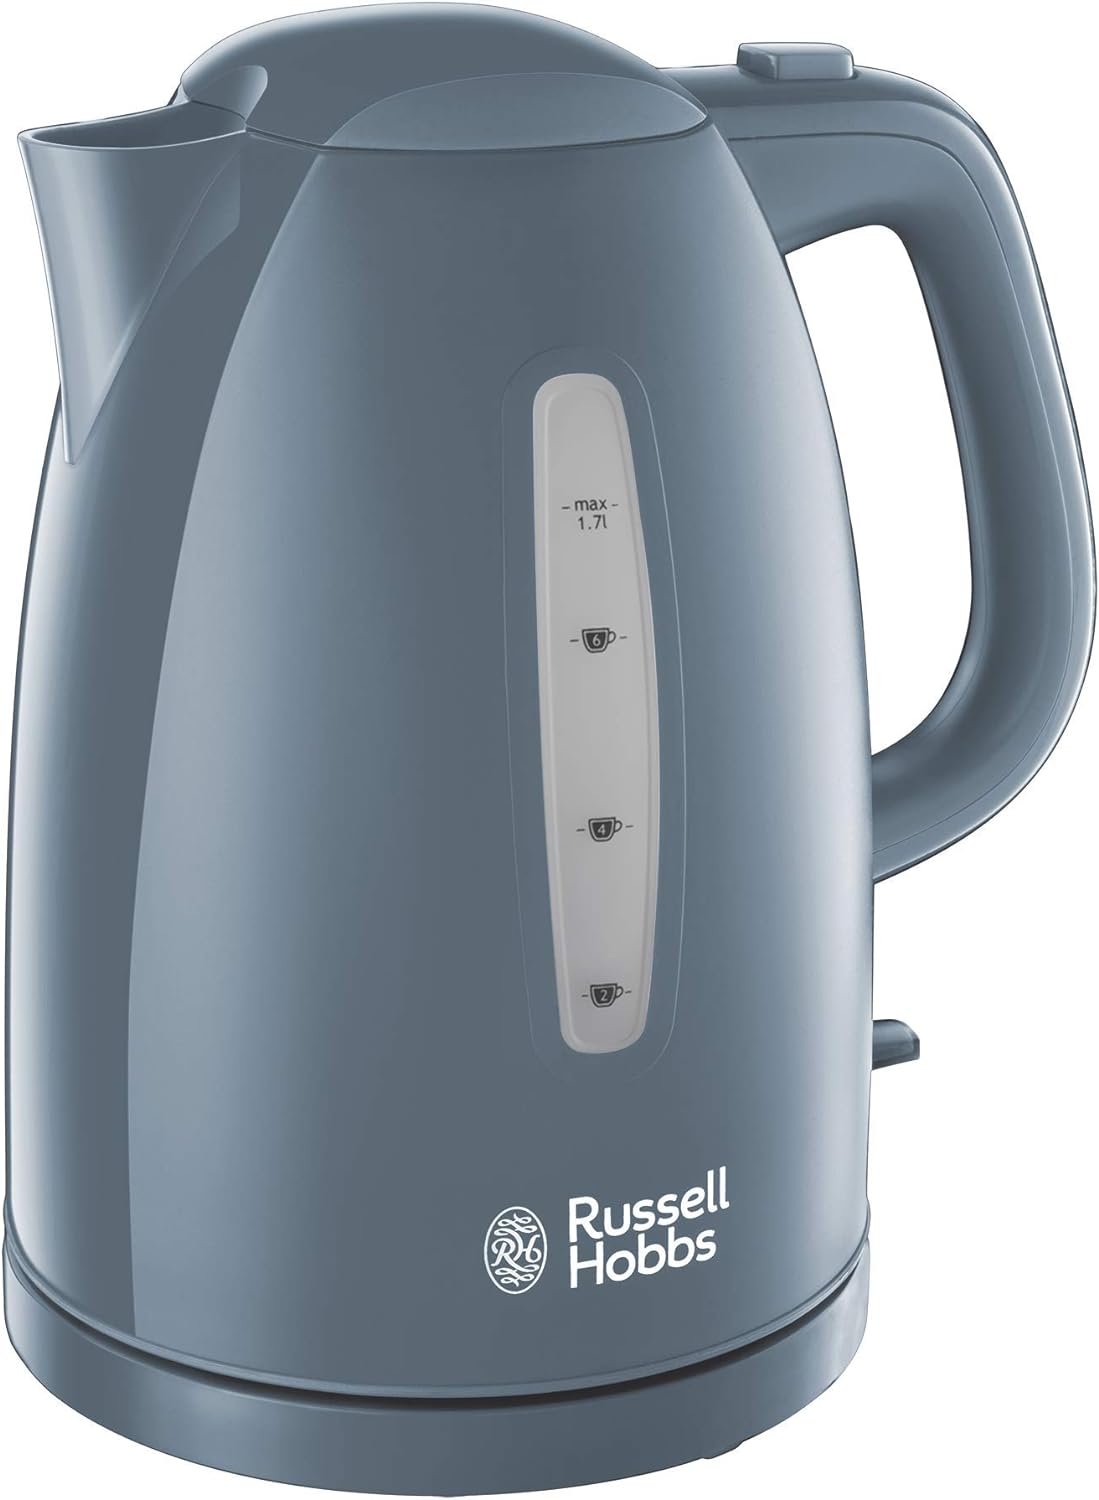 Russell Hobbs Textures Electric Kettle with Rapid Boil and Perfect Pour Spout, 1.7 Litre, Grey